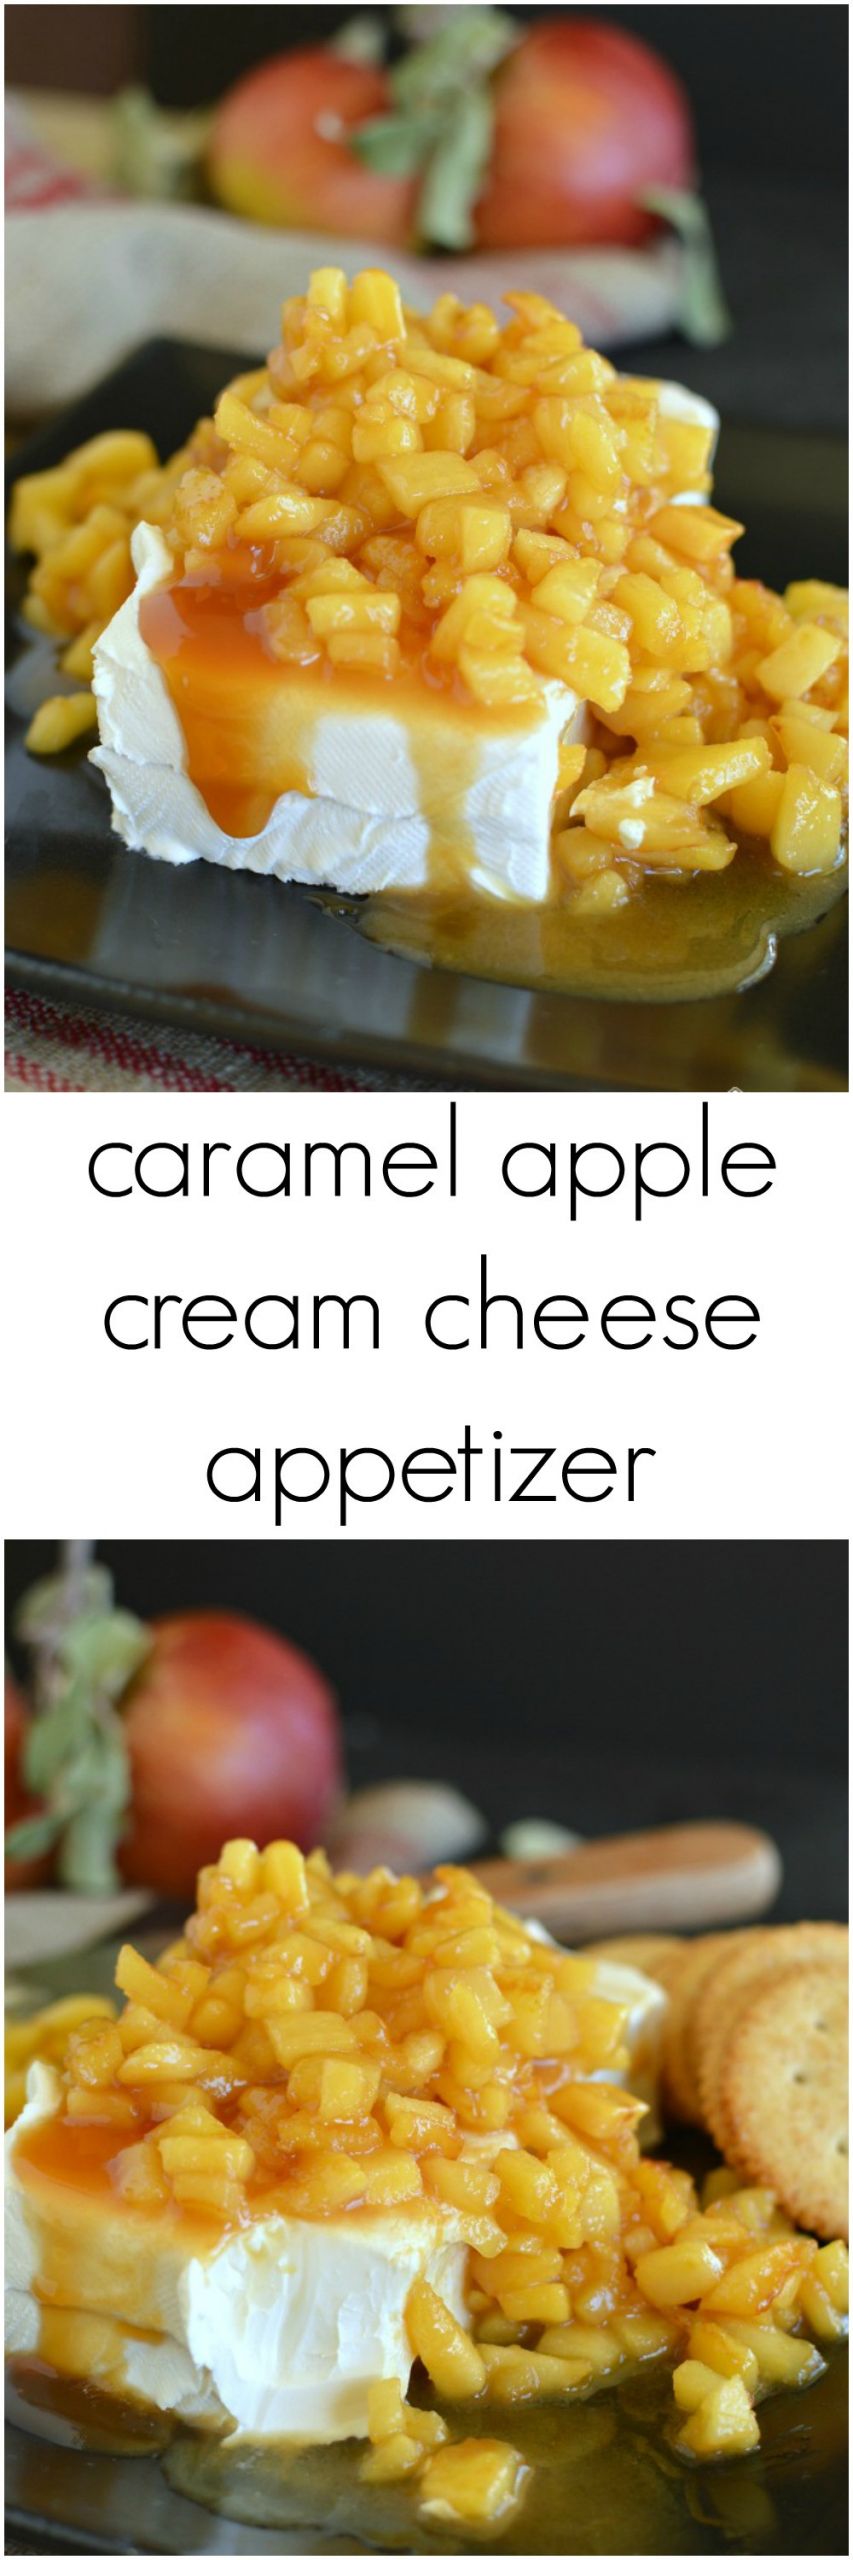 Appetizers With Cream Cheese
 Caramel Apple Cream Cheese Appetizer Little Dairy the